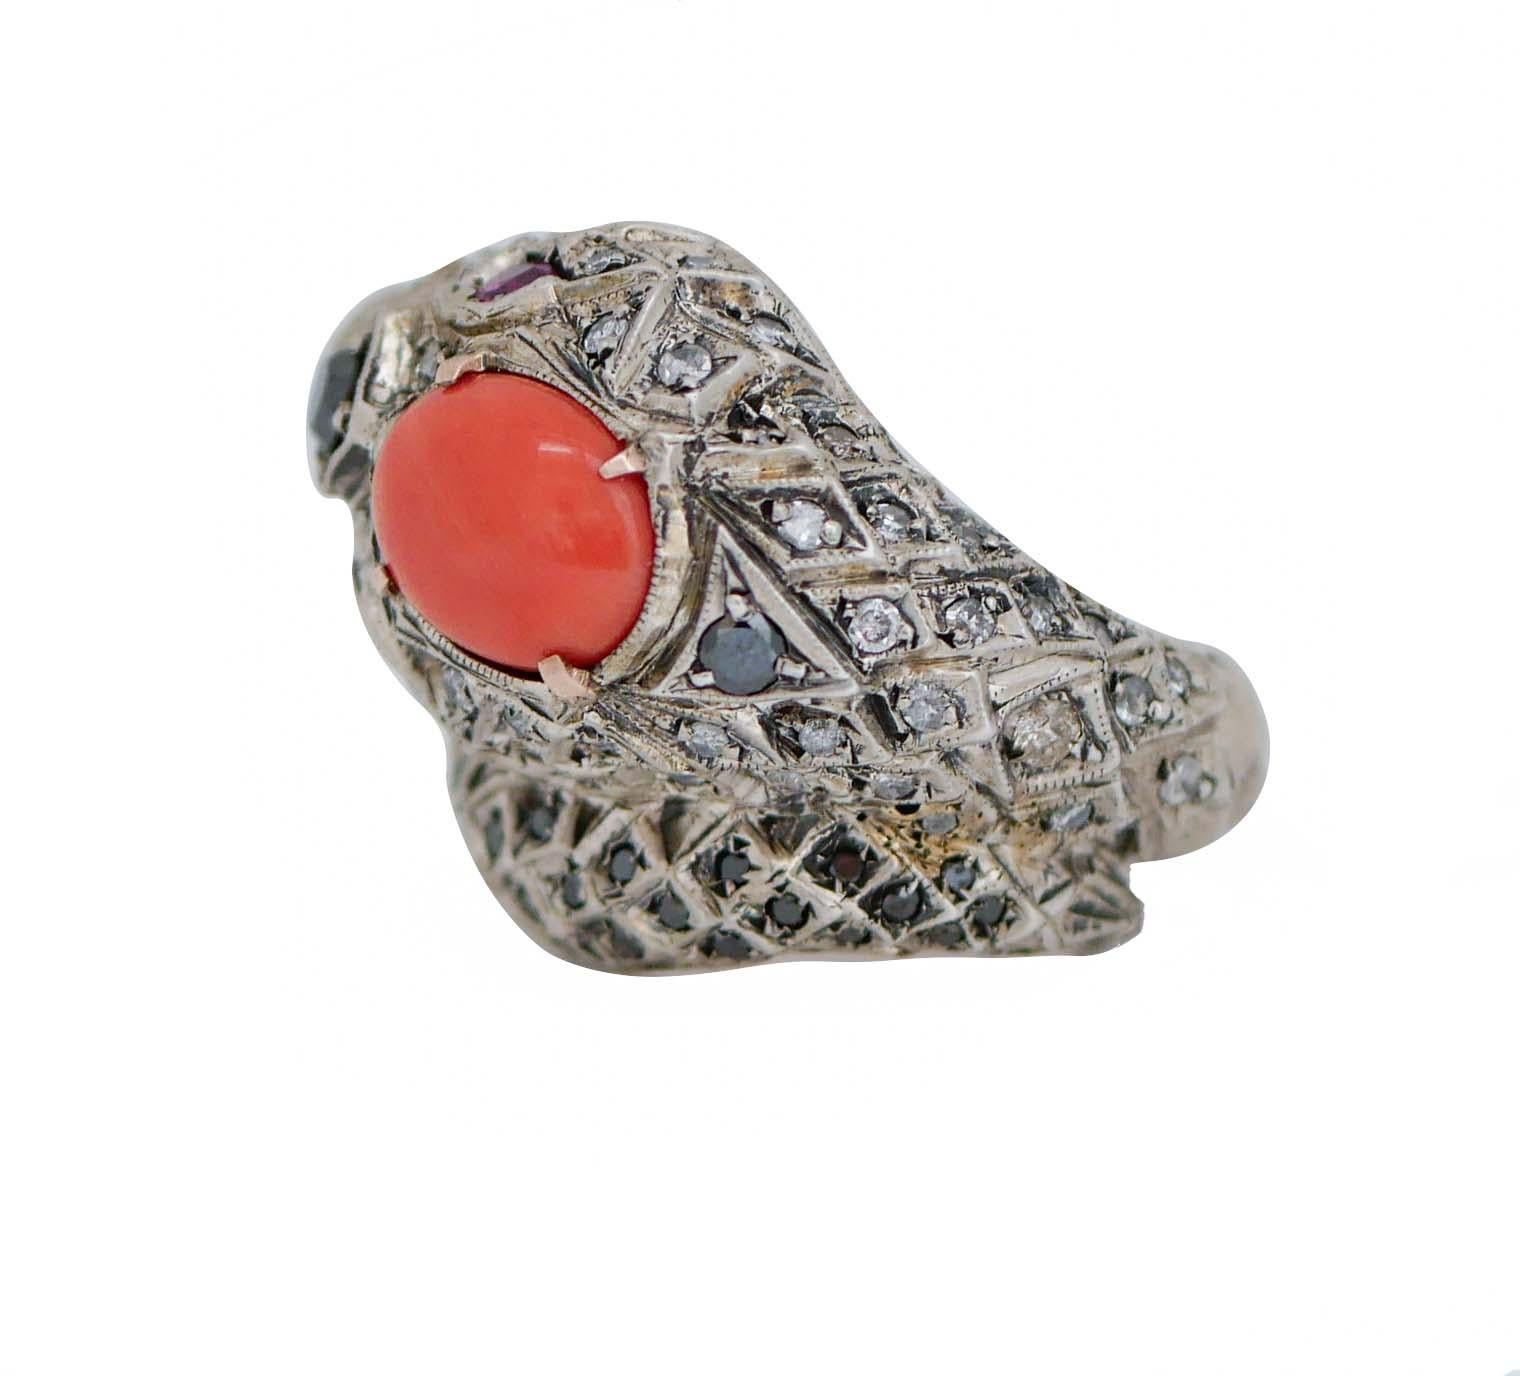 Retro Coral, Rubies, Diamonds, Rose Gold and Silver Snake Ring. For Sale